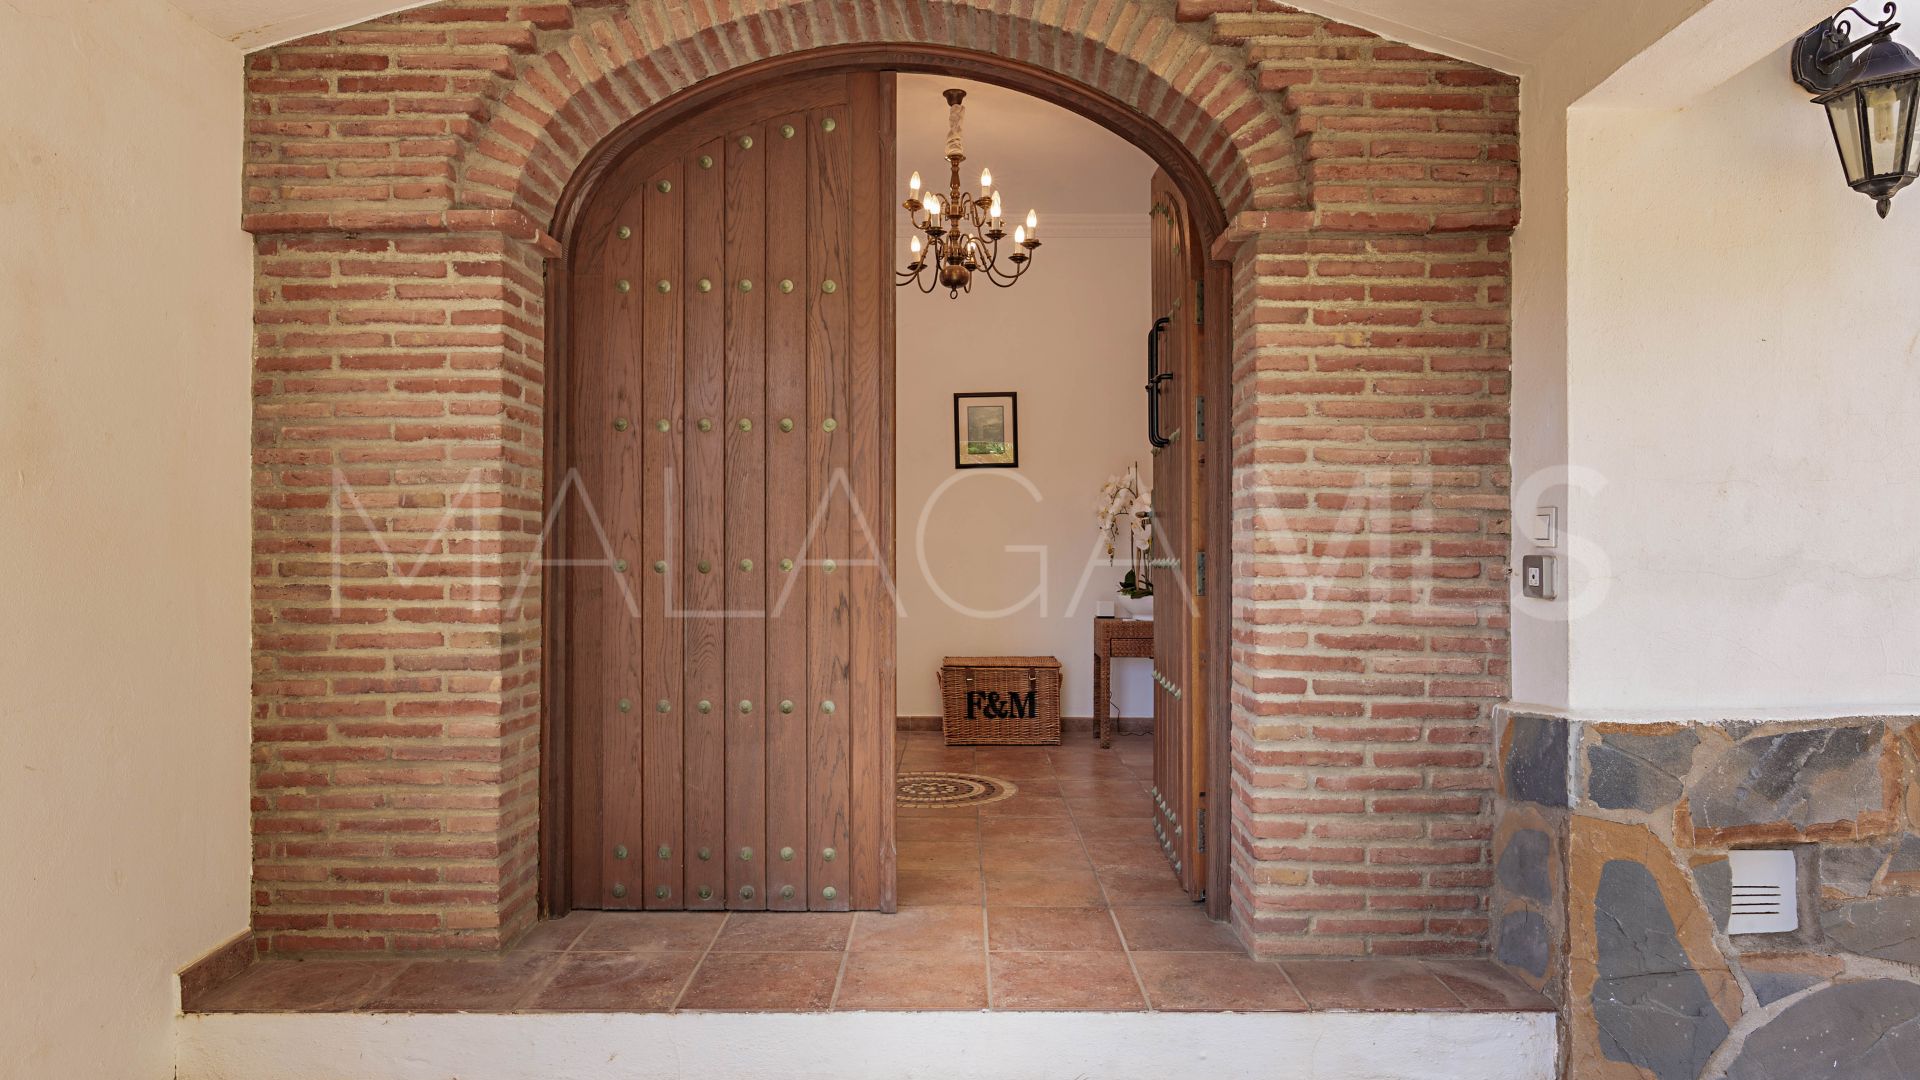 For sale country house in Casares